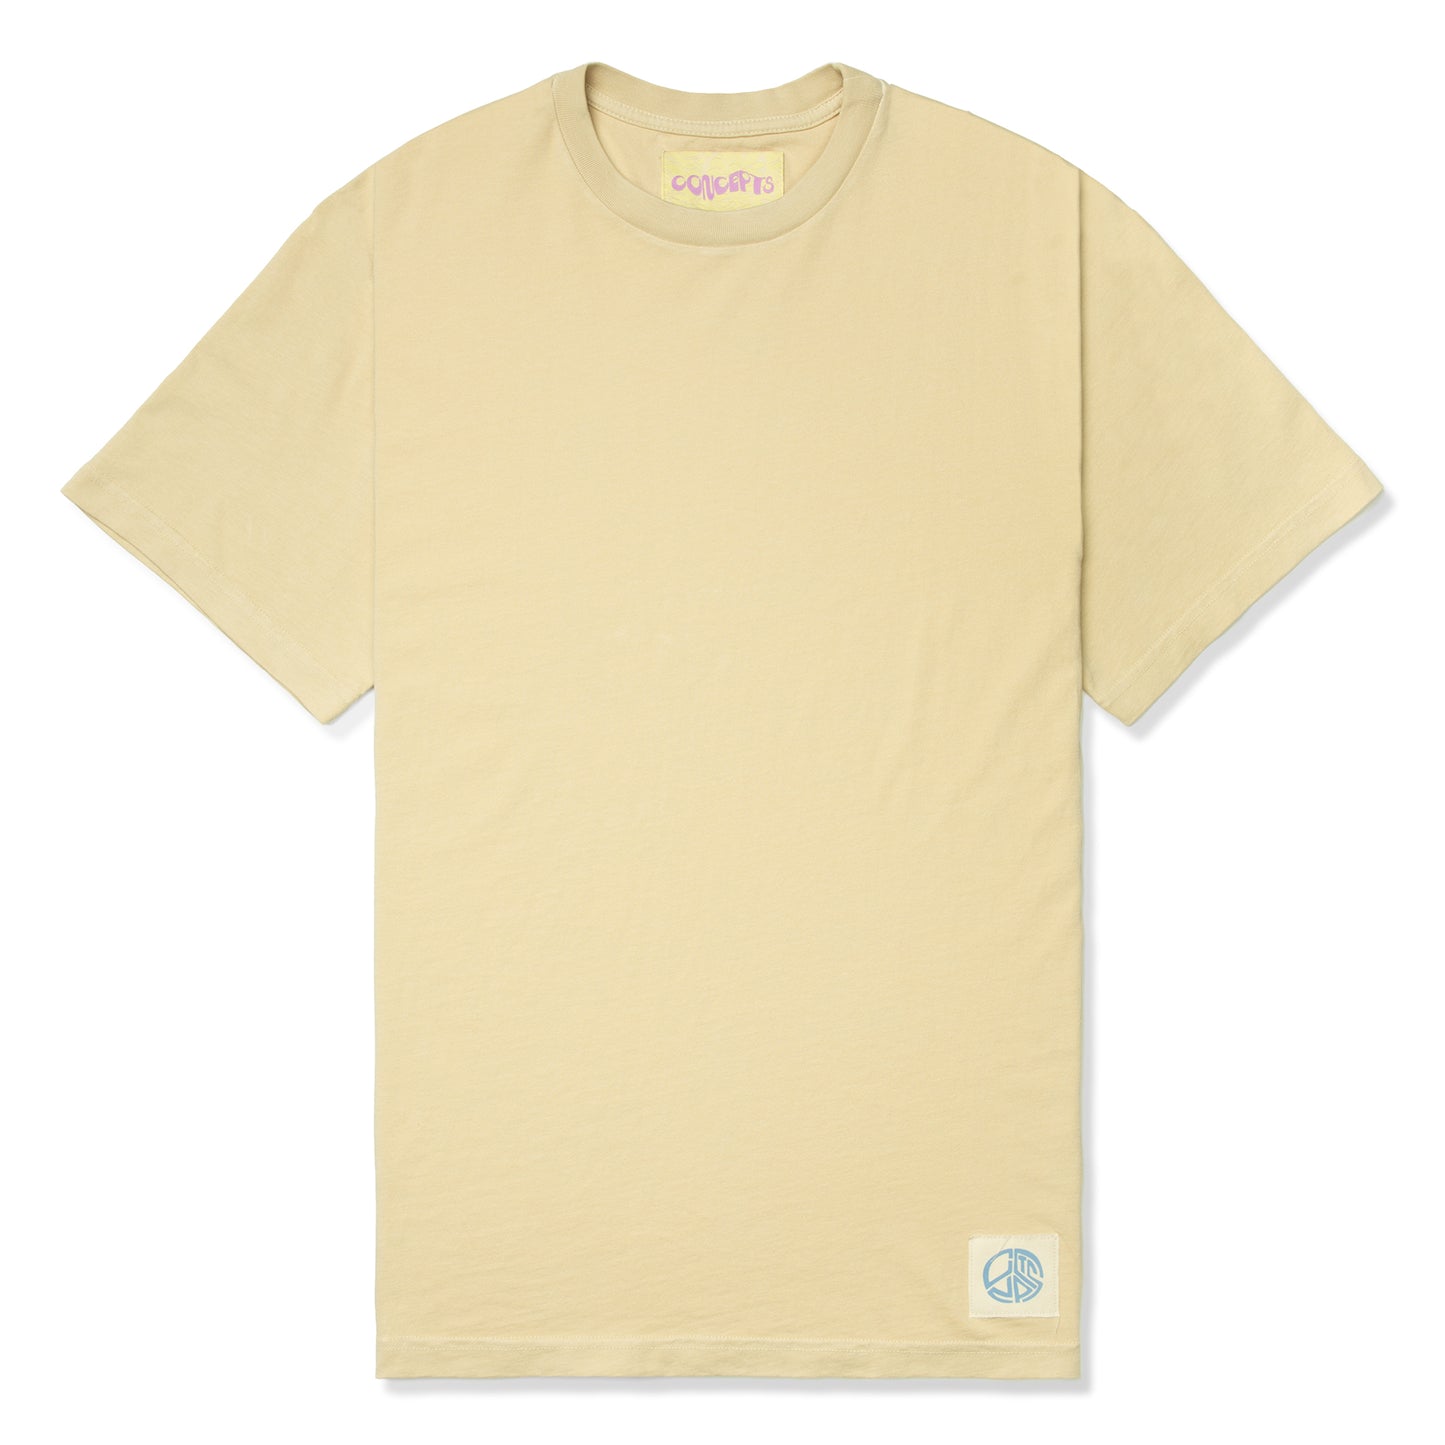 Concepts Patch Tee (Sunflower)